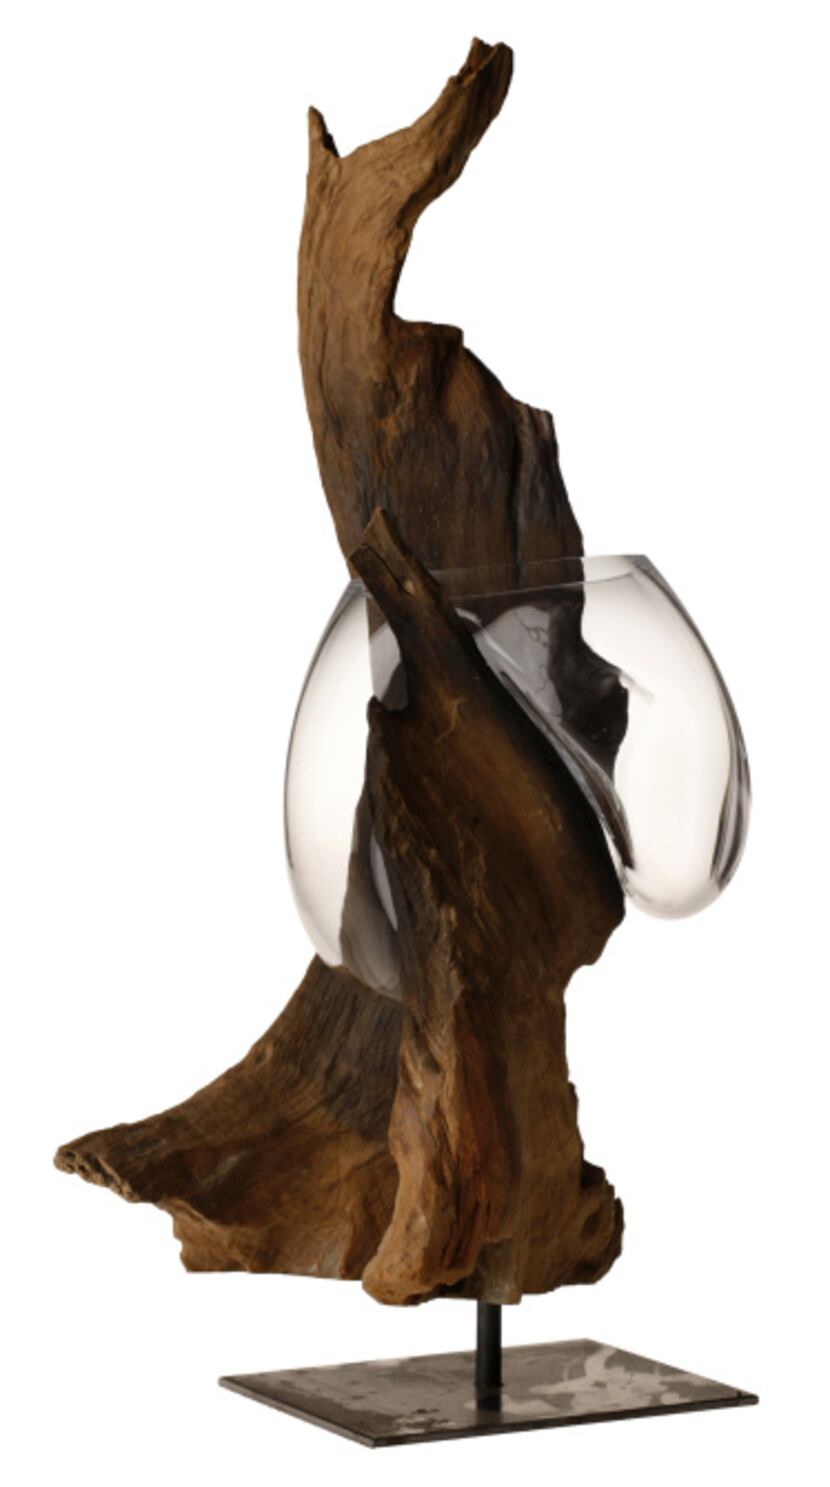 Sculpted by nature: Driftwood is transformed into art with the hand-blown Droplet vase. The...